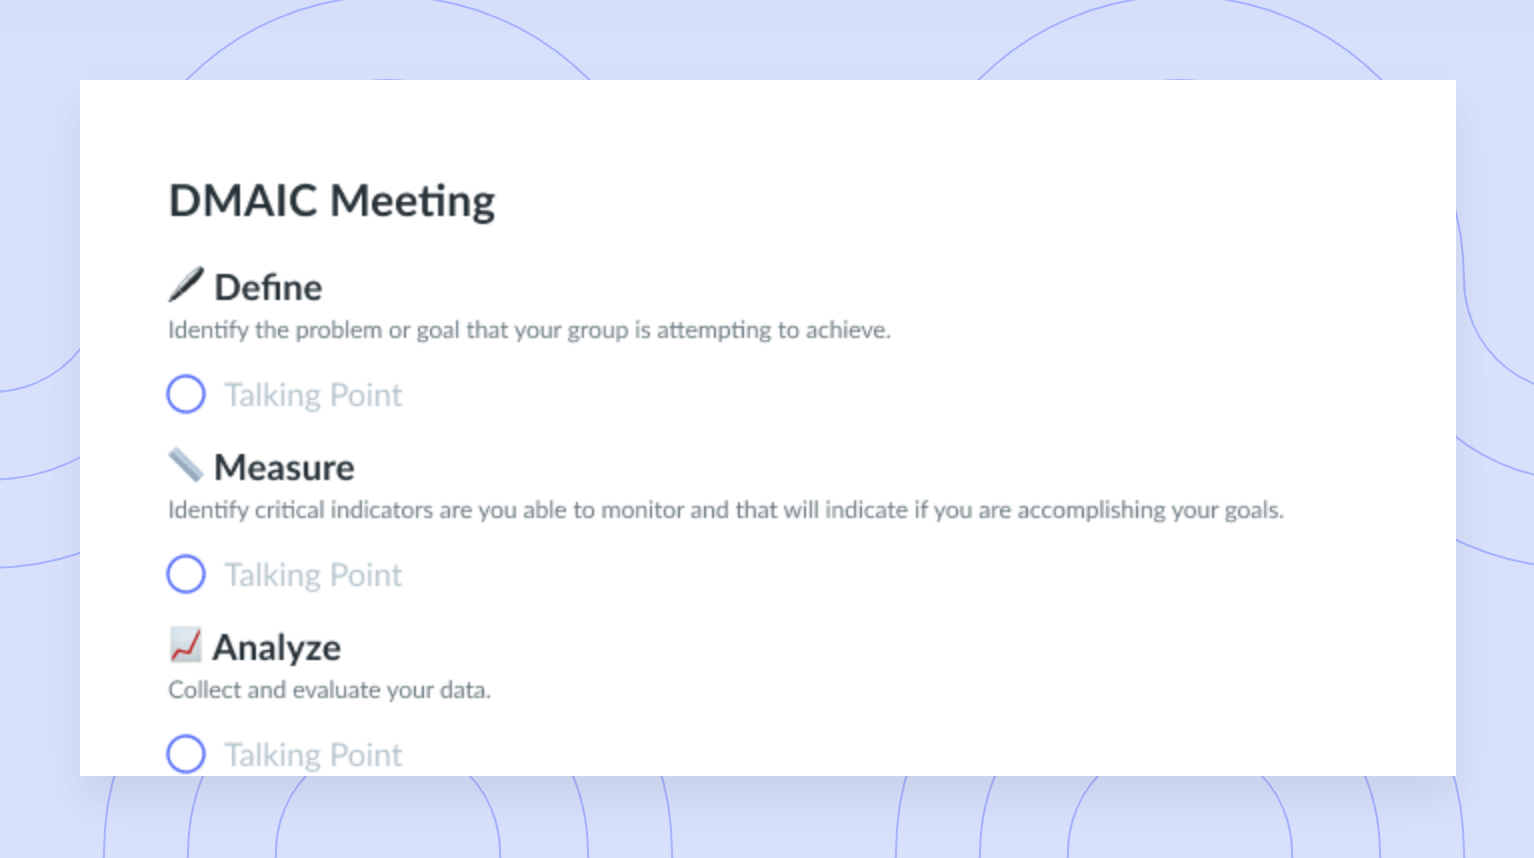 DMAIC (define, measure, analyze, improve, and control) Meeting Template